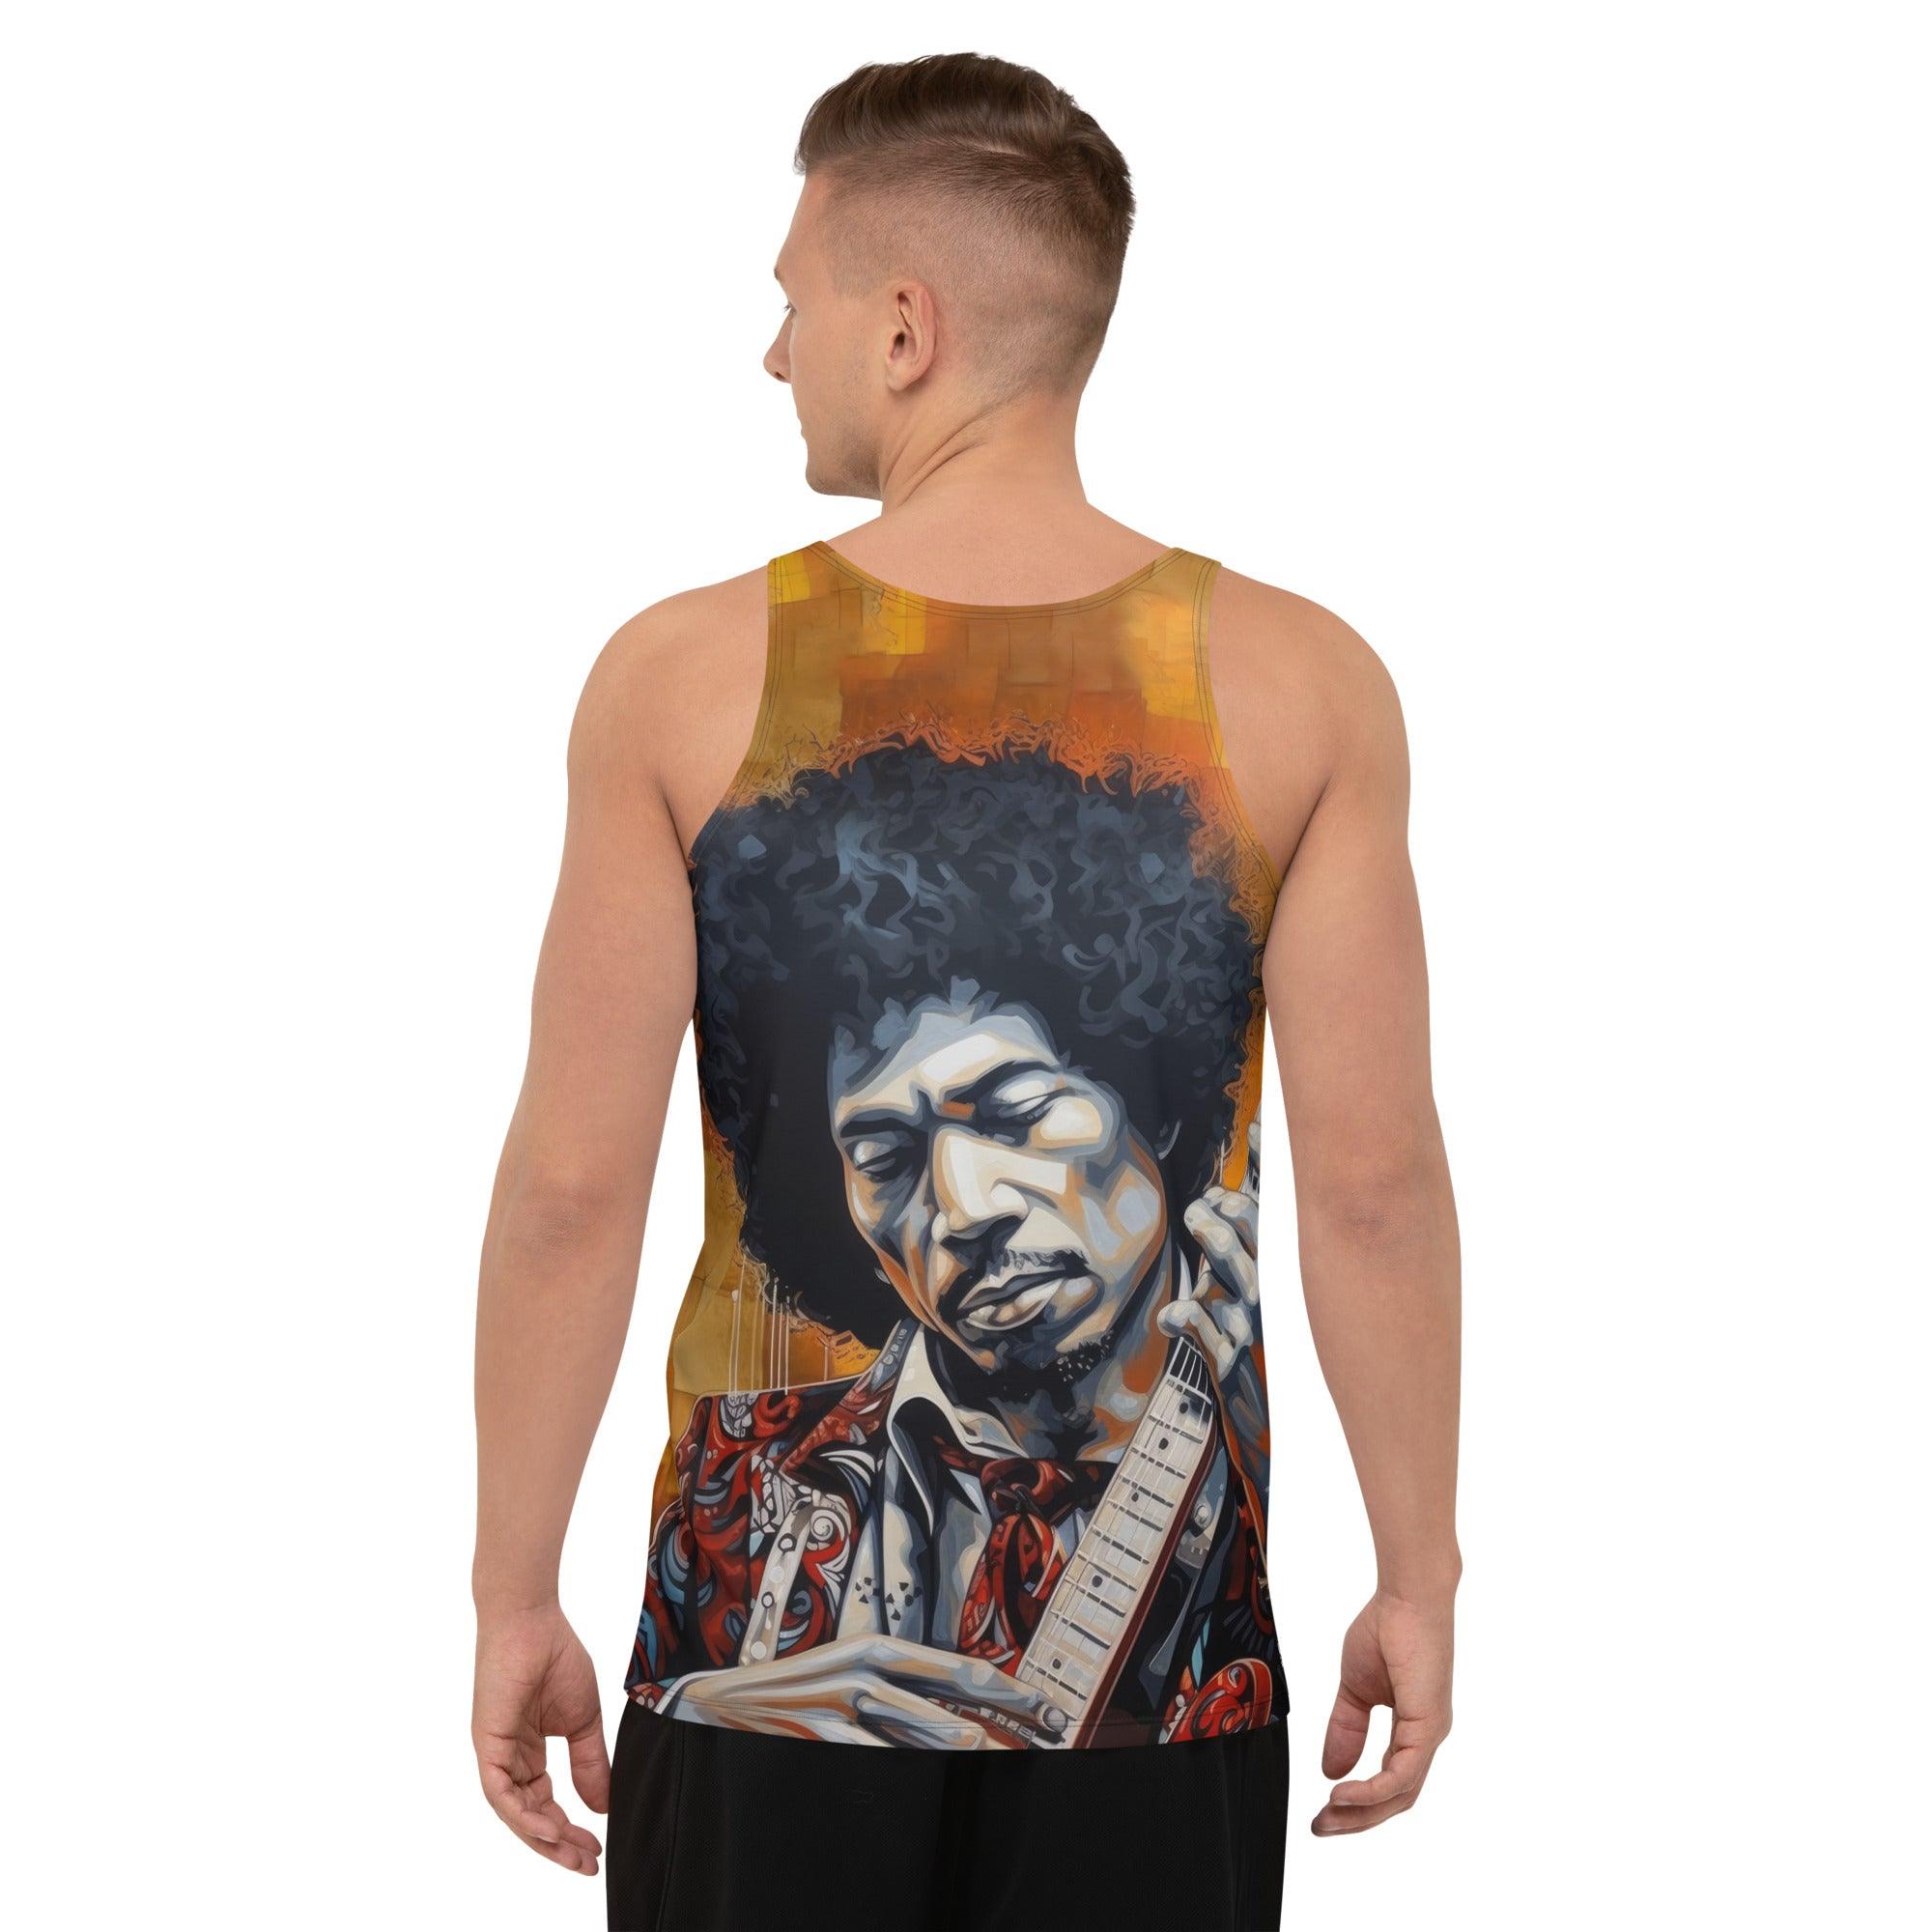 Music-inspired Tank Top for Men and Women